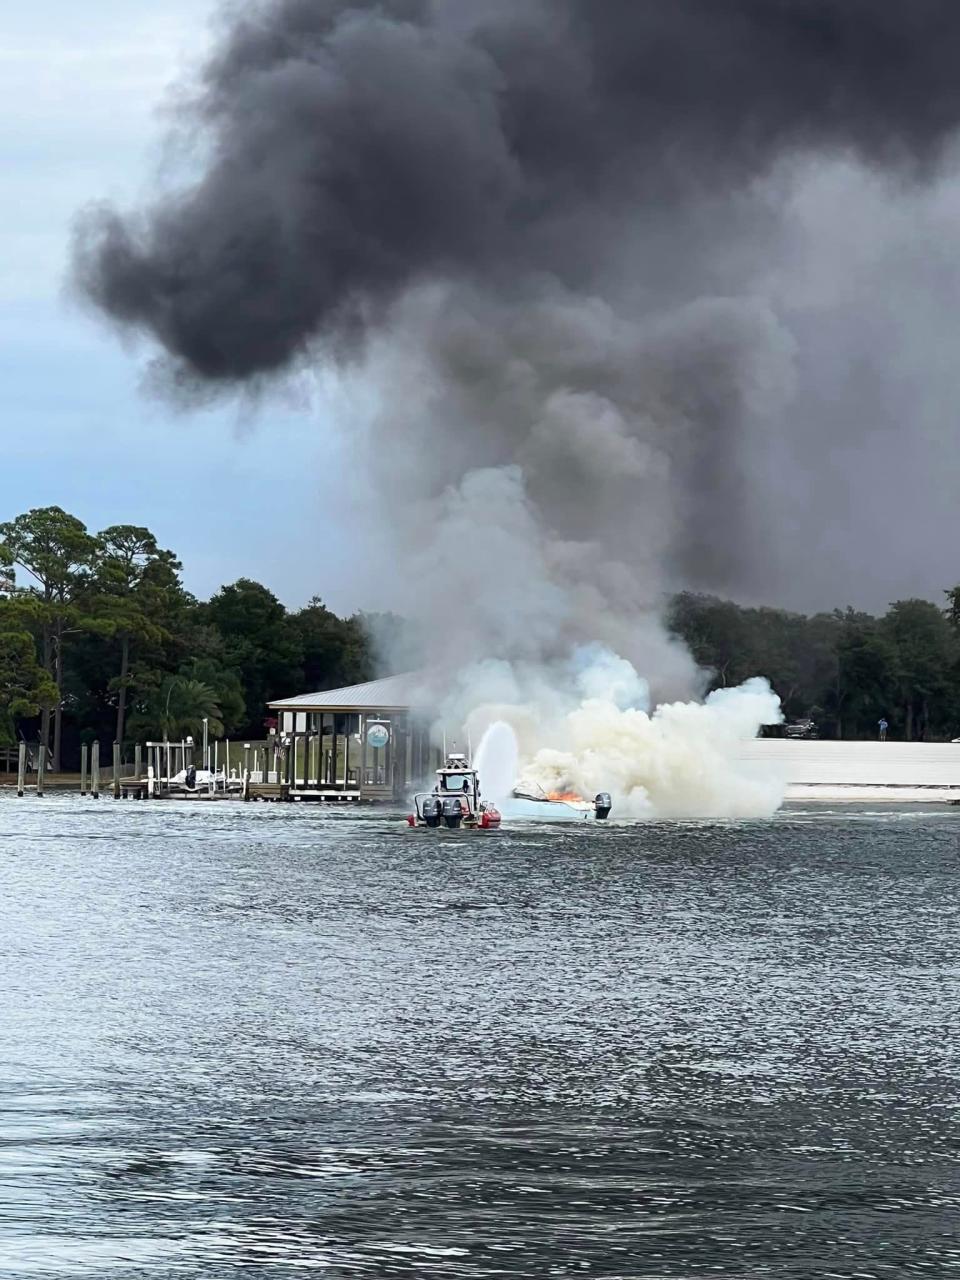 Destin firefighters put out a fire on a boat after an Okaloosa County deputy and Eglin police unit kept the boat away from a private dock using their wakes.